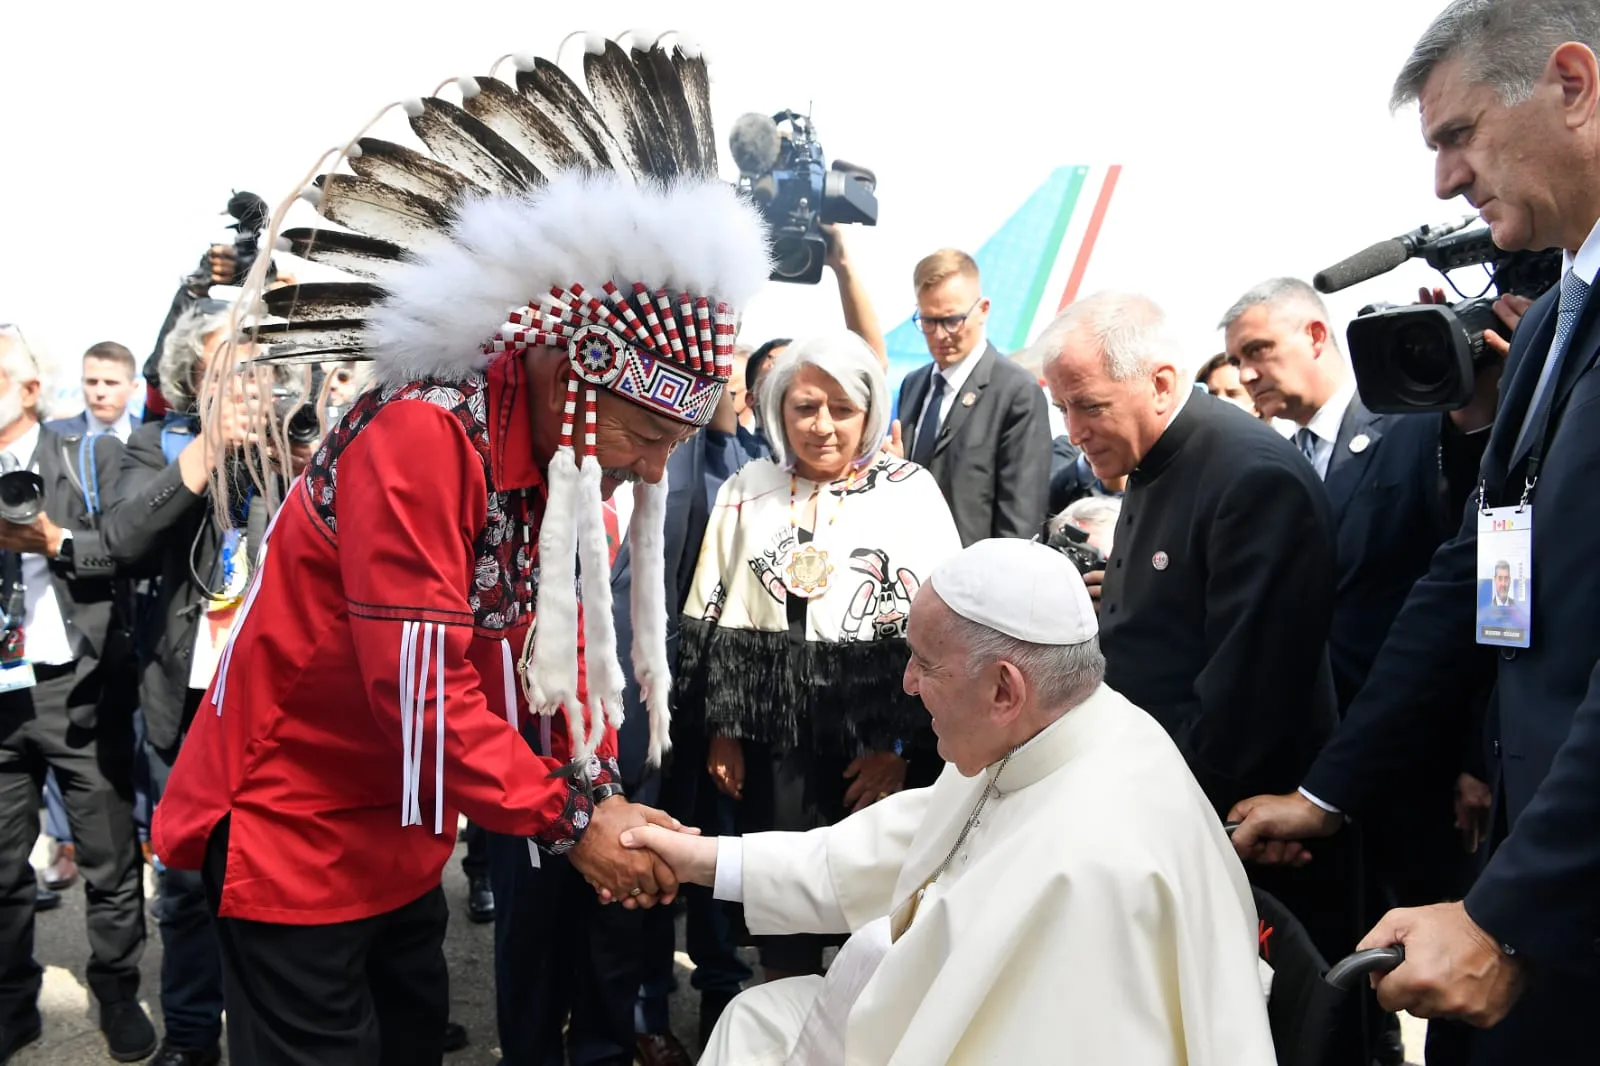 Pope Francis is greeted by a representative of Canada's indigenous peoples upon his arrival in Edmonton, Alberta, on July 24, 2022 at the start of his six-day visit to Canada.?w=200&h=150